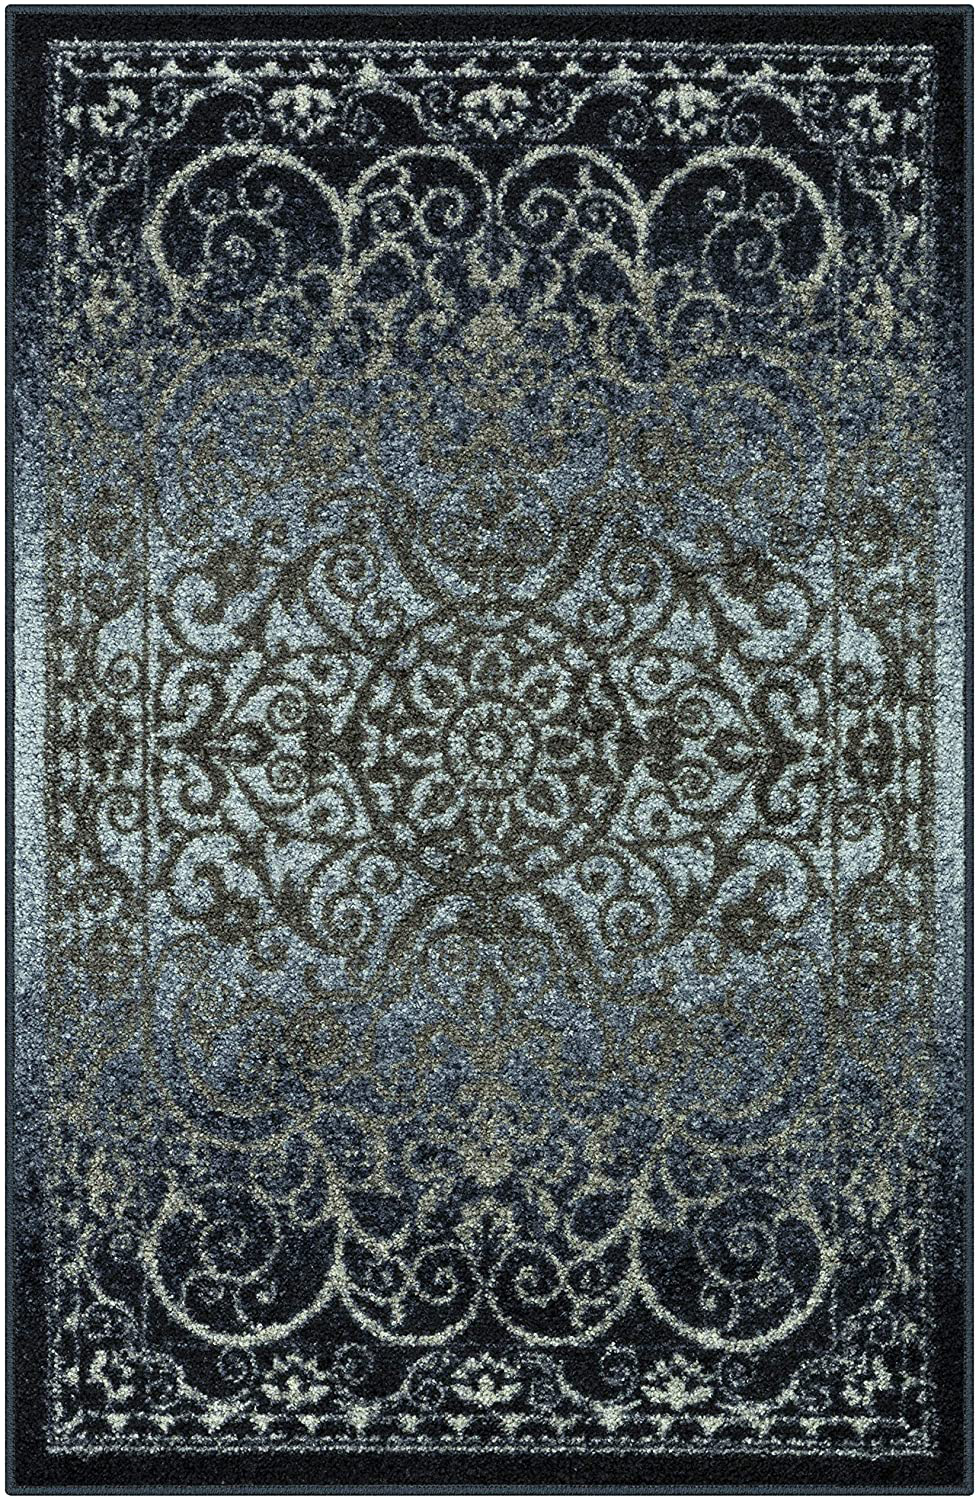 Maples Rugs Pelham Vintage Area Rugs for Living Room & Bedroom [Made in USA], 3'4 x 5, Navy/Grey